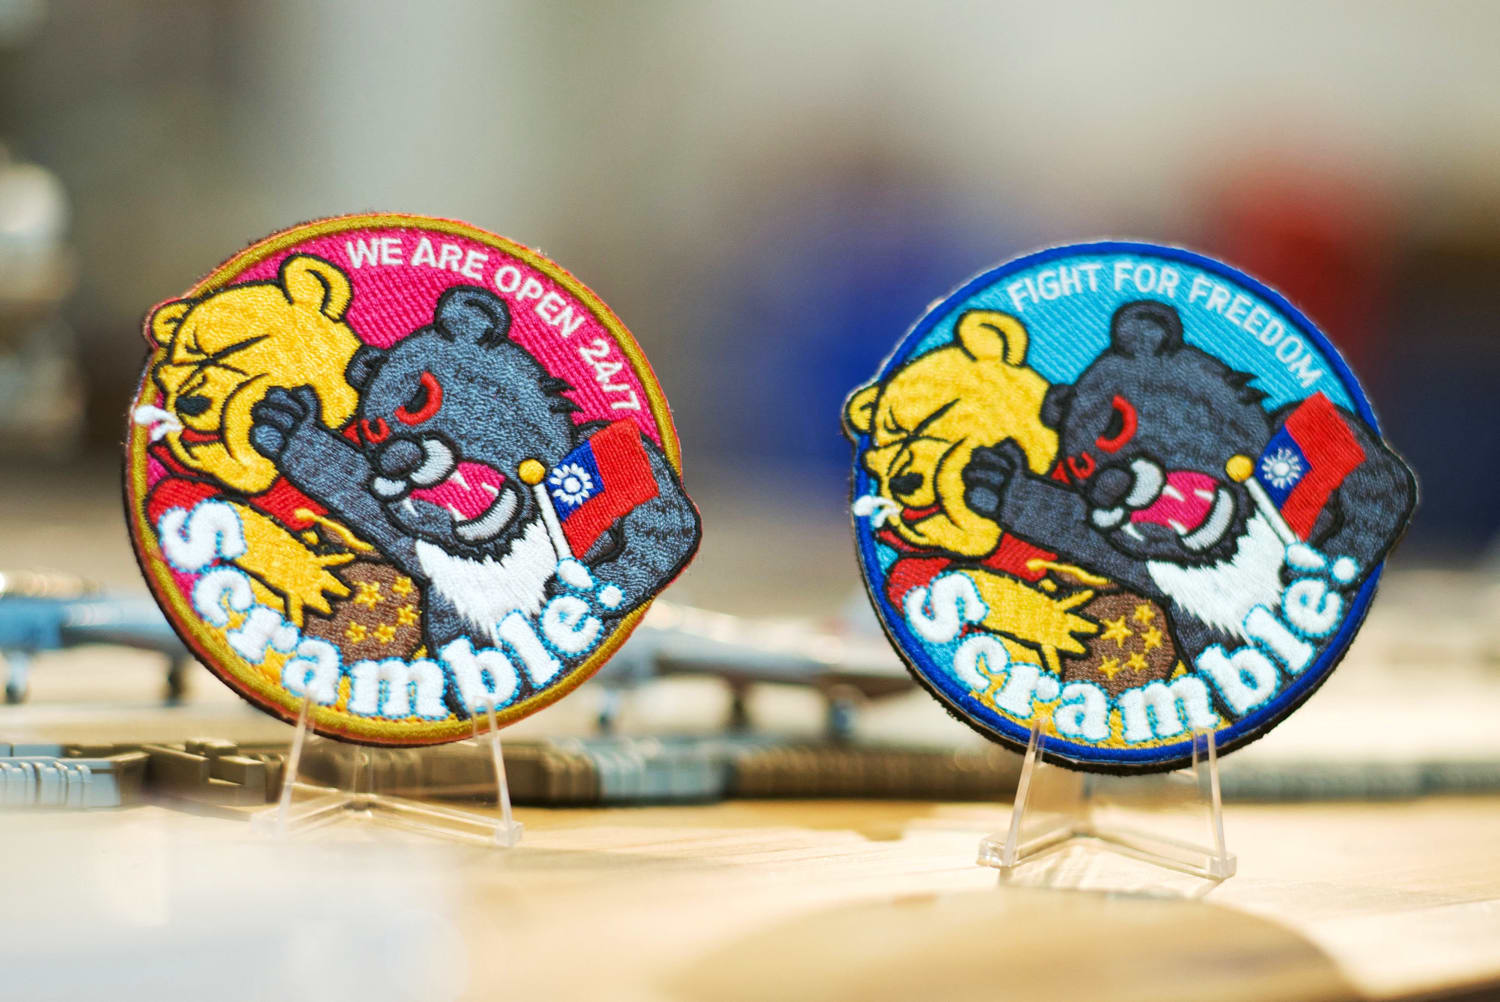 Taiwan punches back against China with Winnie the Pooh badge